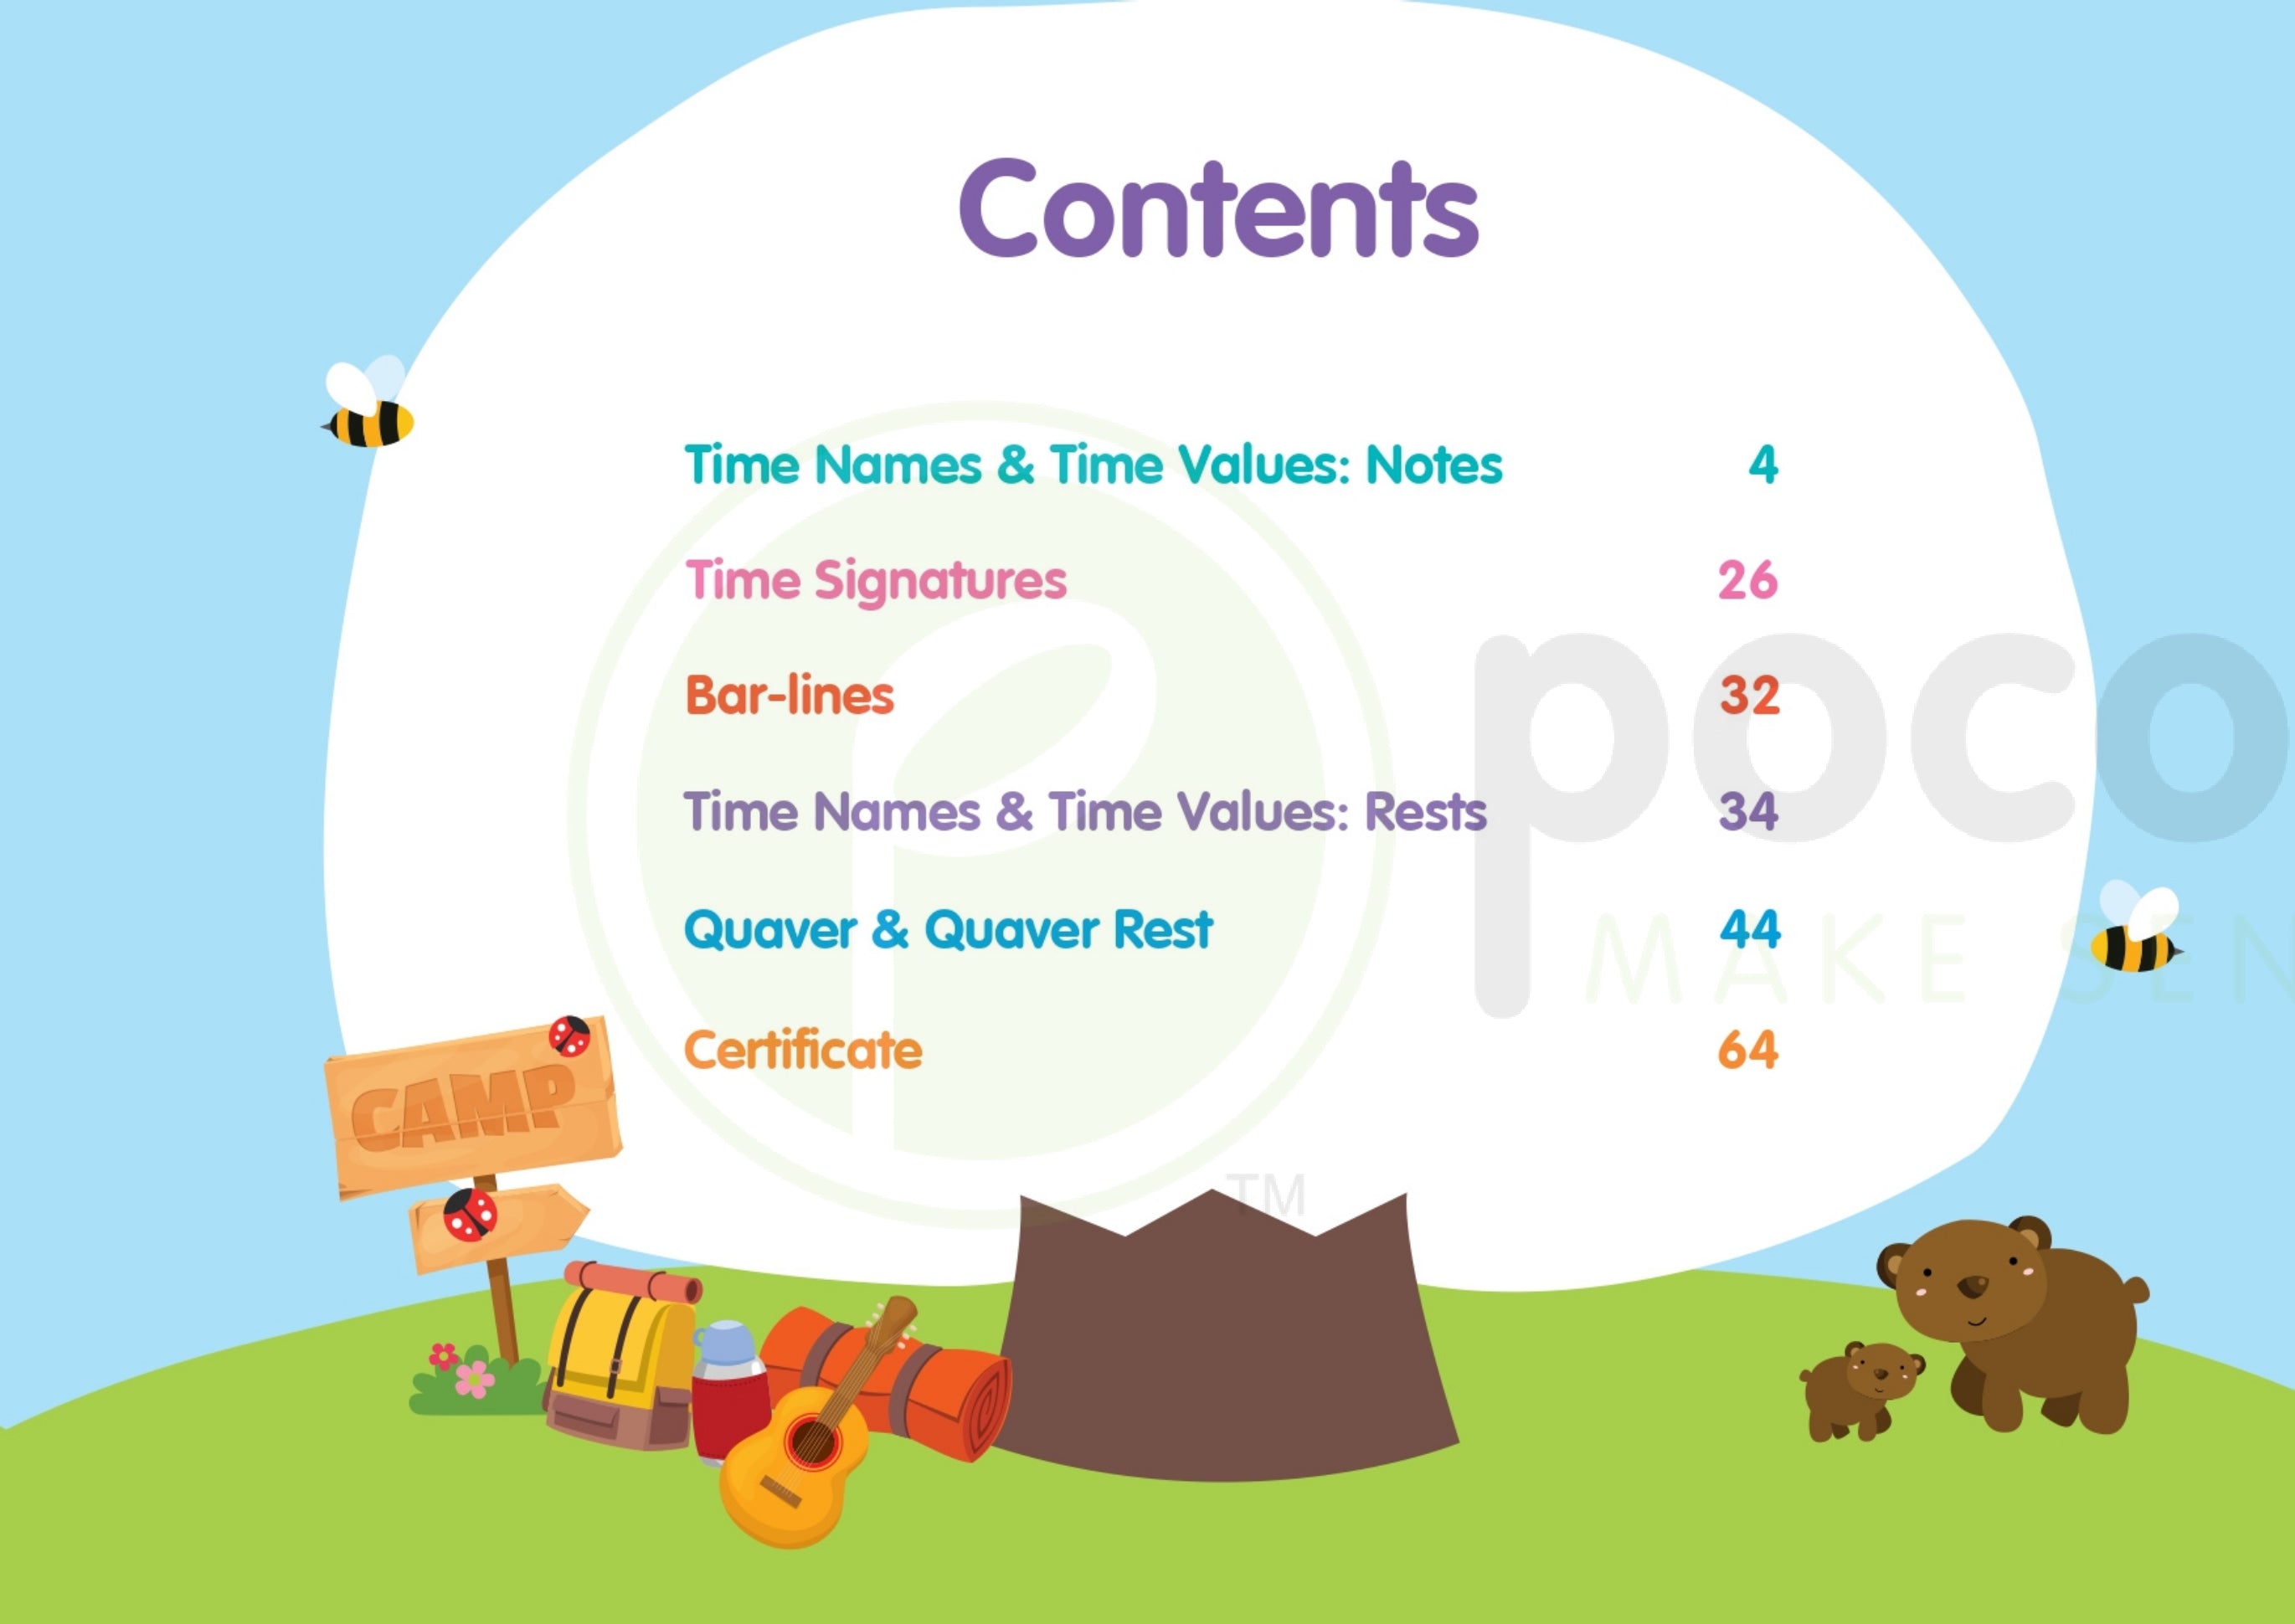 Theory Drills for Young Children Book 2 - Time Names, Values & Signatures